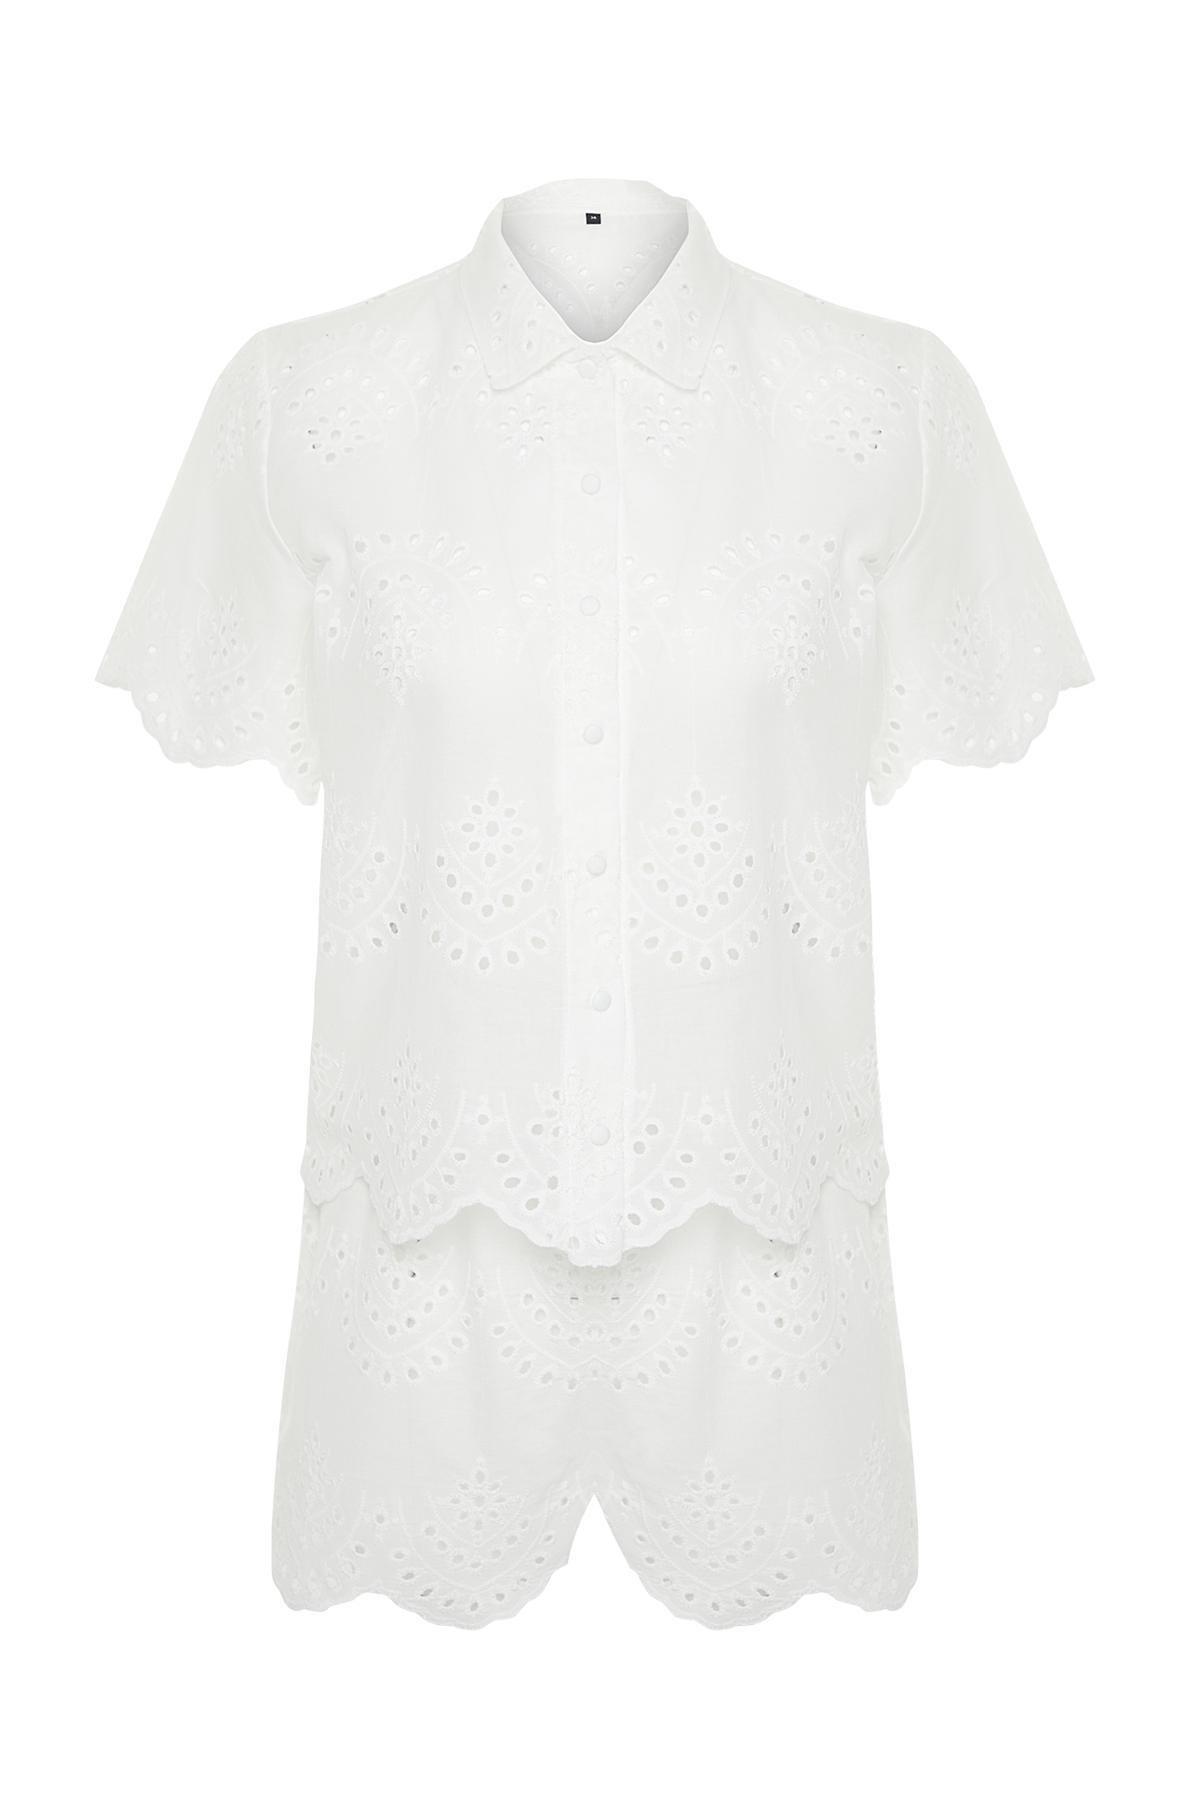 Trendyol - White Embroided Co-Ord Set